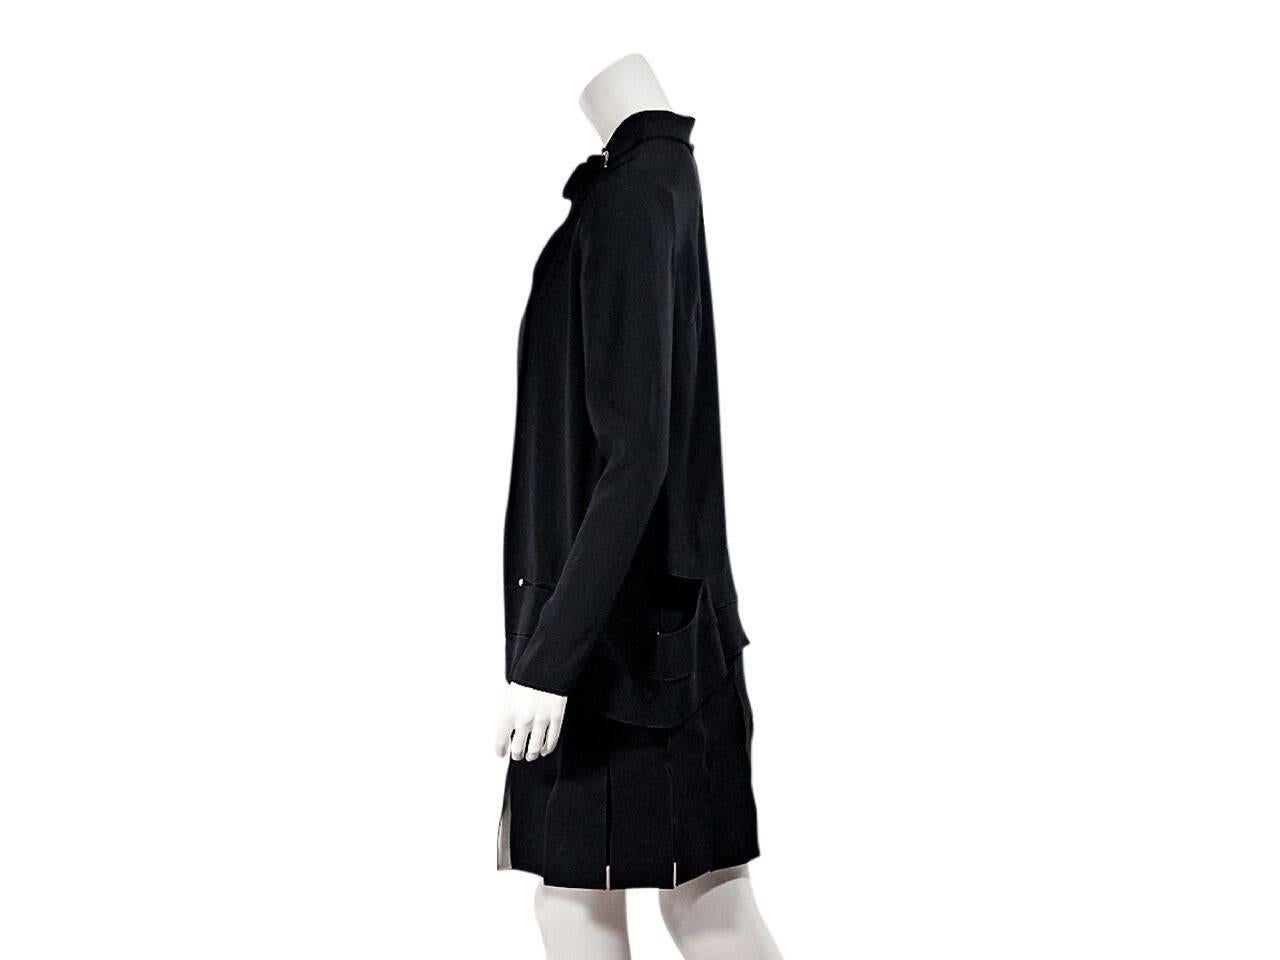 Product details: Black twofer dress by Proenza Schouler. Designed to look like a jacket and dress. Neck tie closure. Long sleeves. Drop waist. 
Condition: Pre-owned. New with tags.
Est. Retail $ 1,250.00